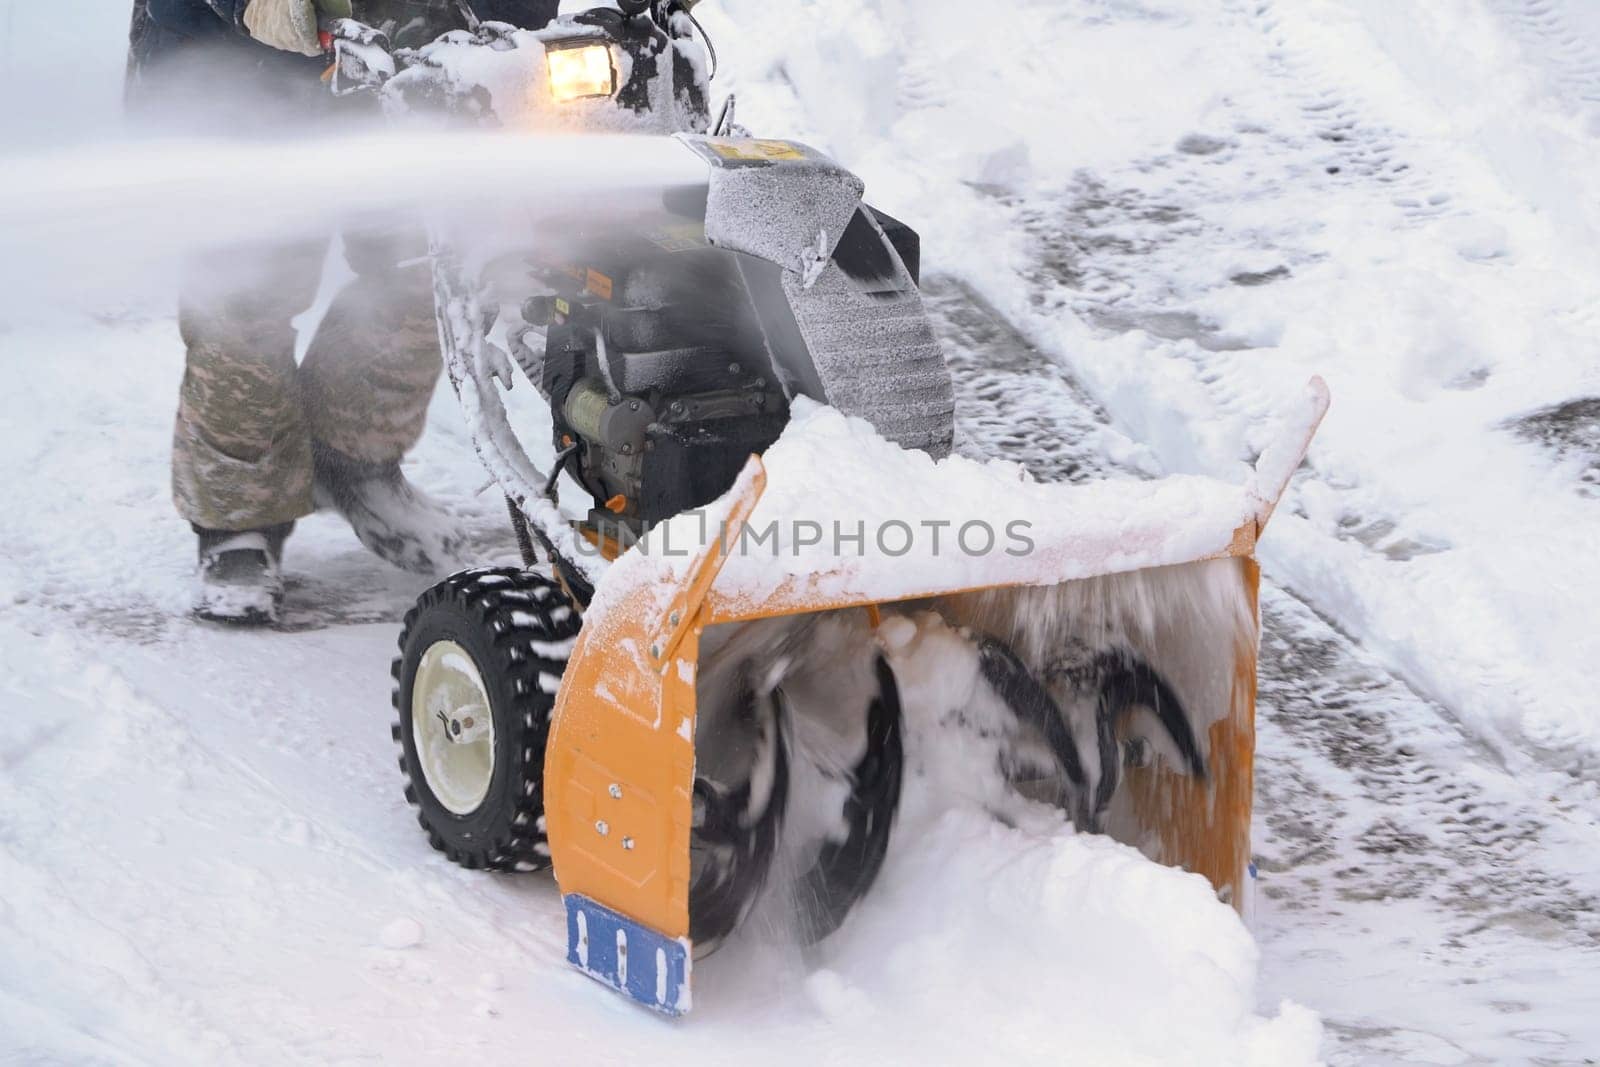 KAMCHATKA PENINSULA, RUSSIA - DEC 28, 2023: A male worker is using a snowblower machine to clear snow from the road after a winter storm. The worker is blowing snow following a blizzard